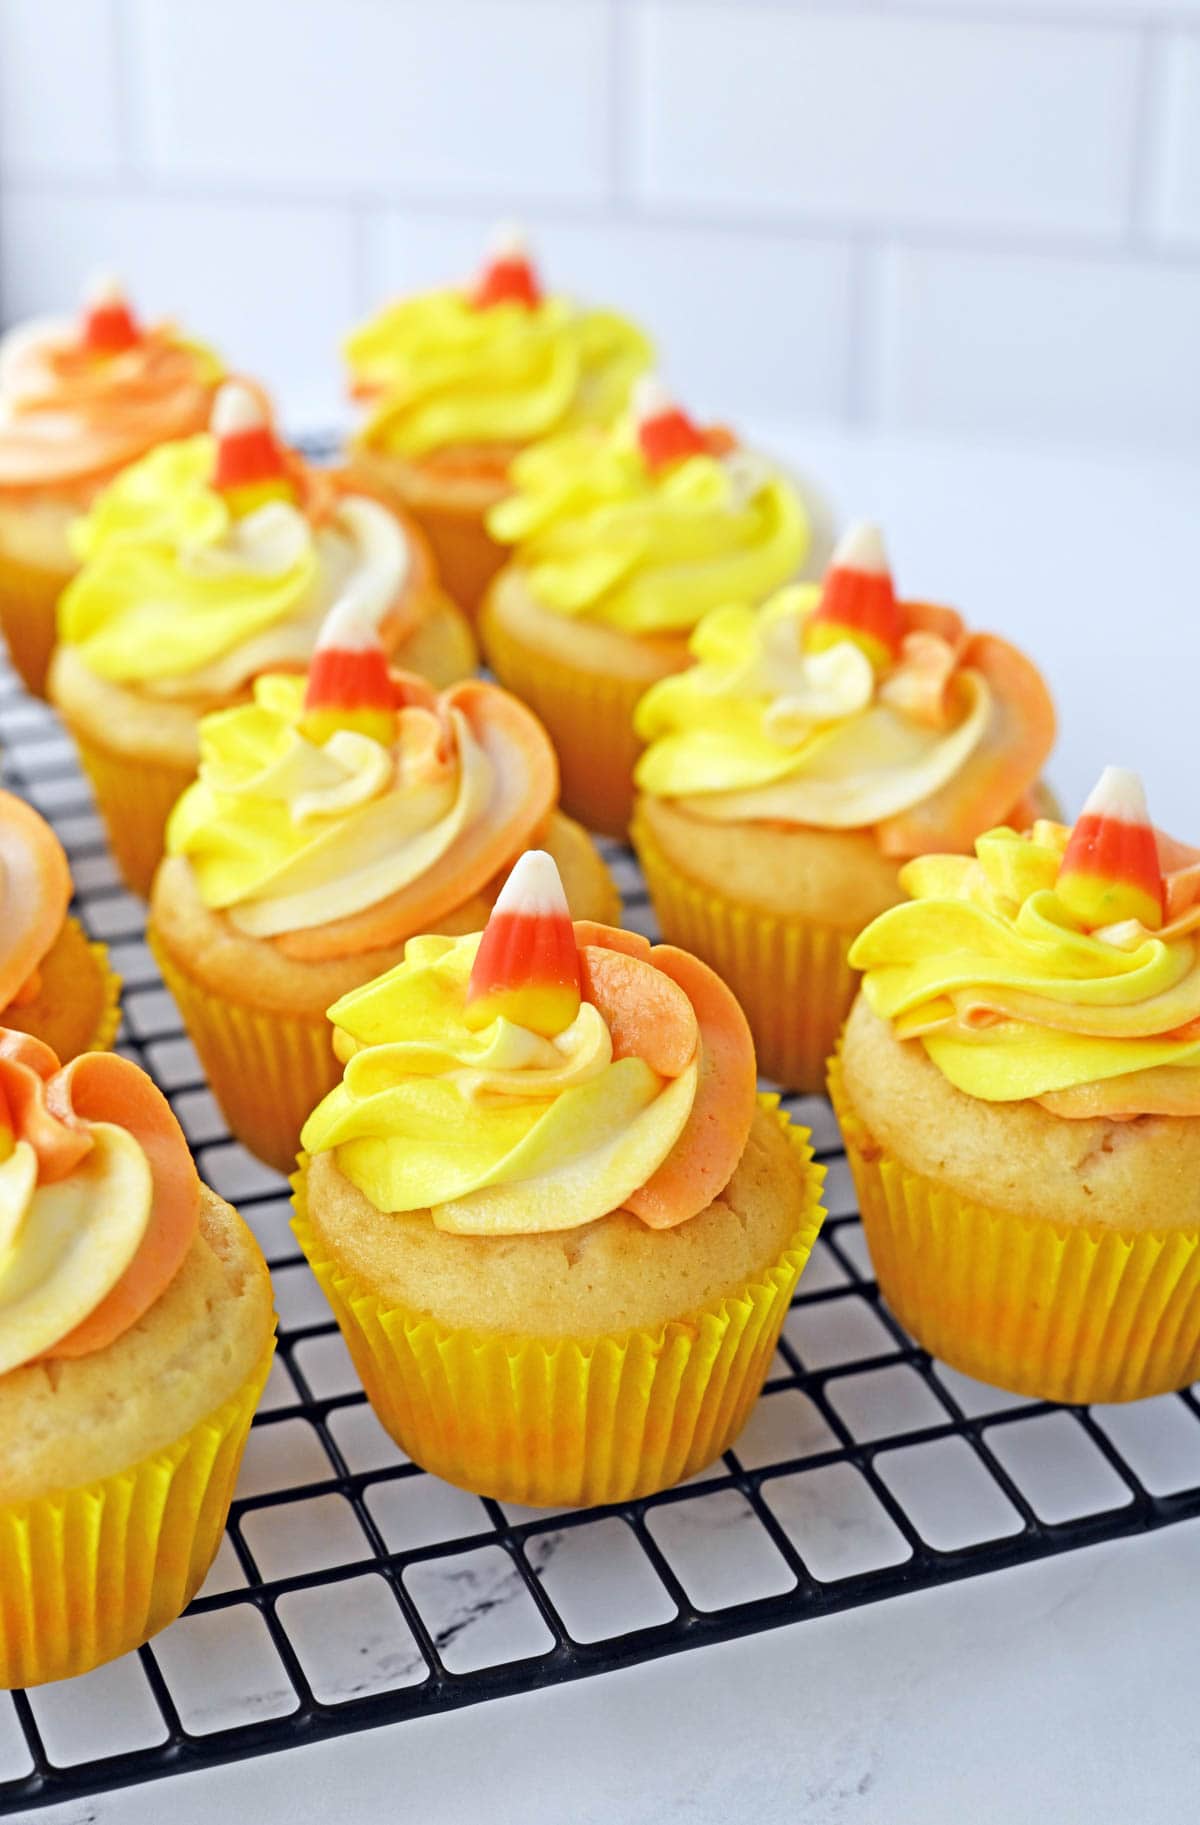 Cupcakes topped with orange, yellow and white swirled icing